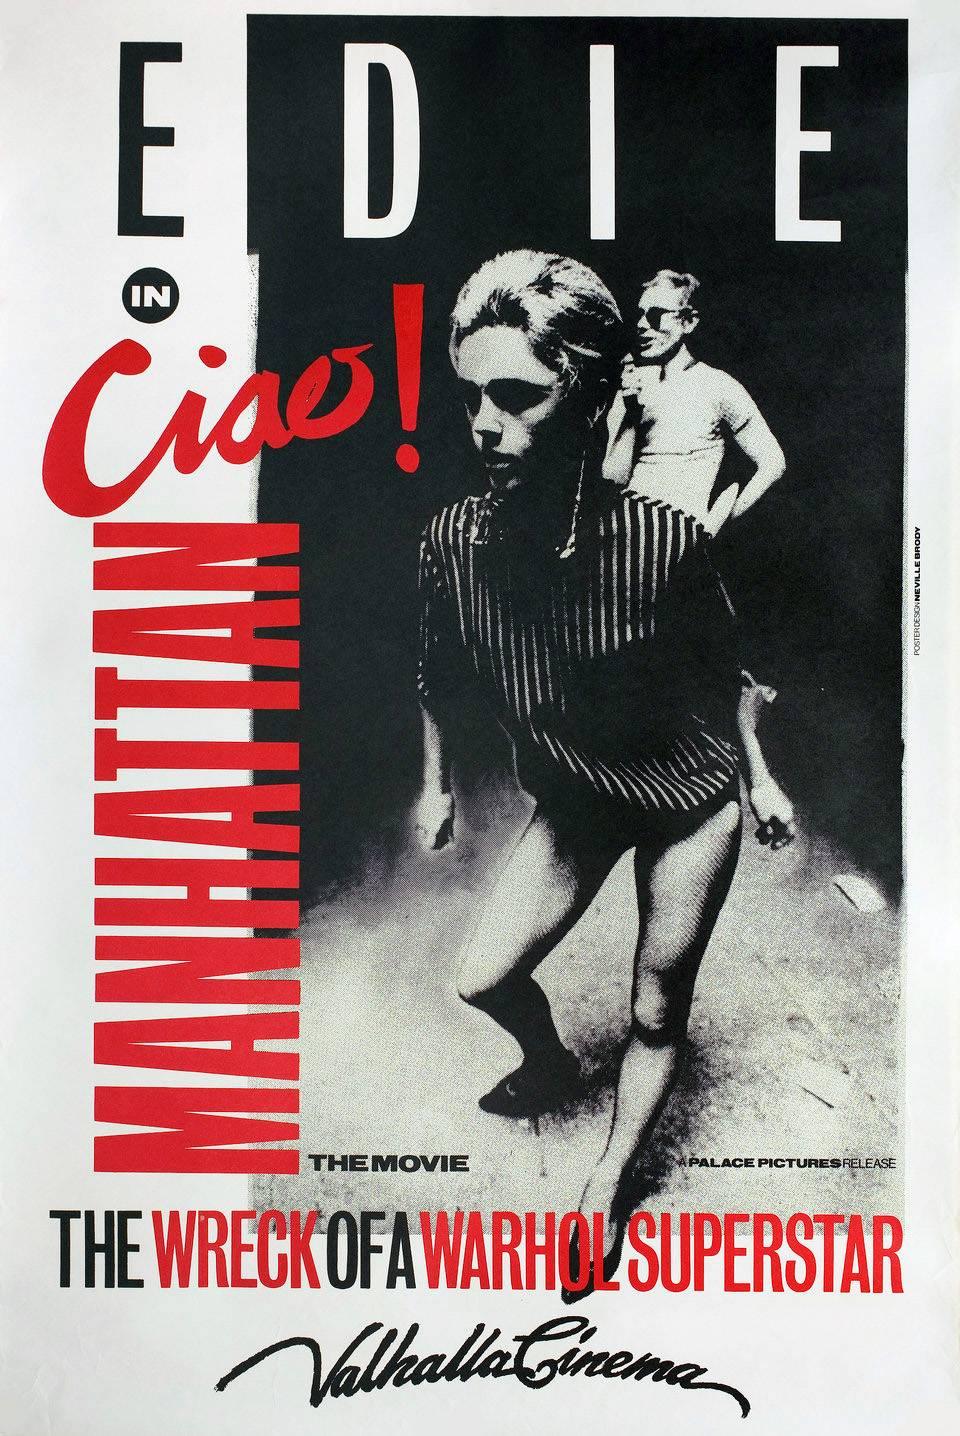 Andy Warhol, Edie Sedgwick, Vintage Ciao Manhattan Movie Poster - Art by Unknown